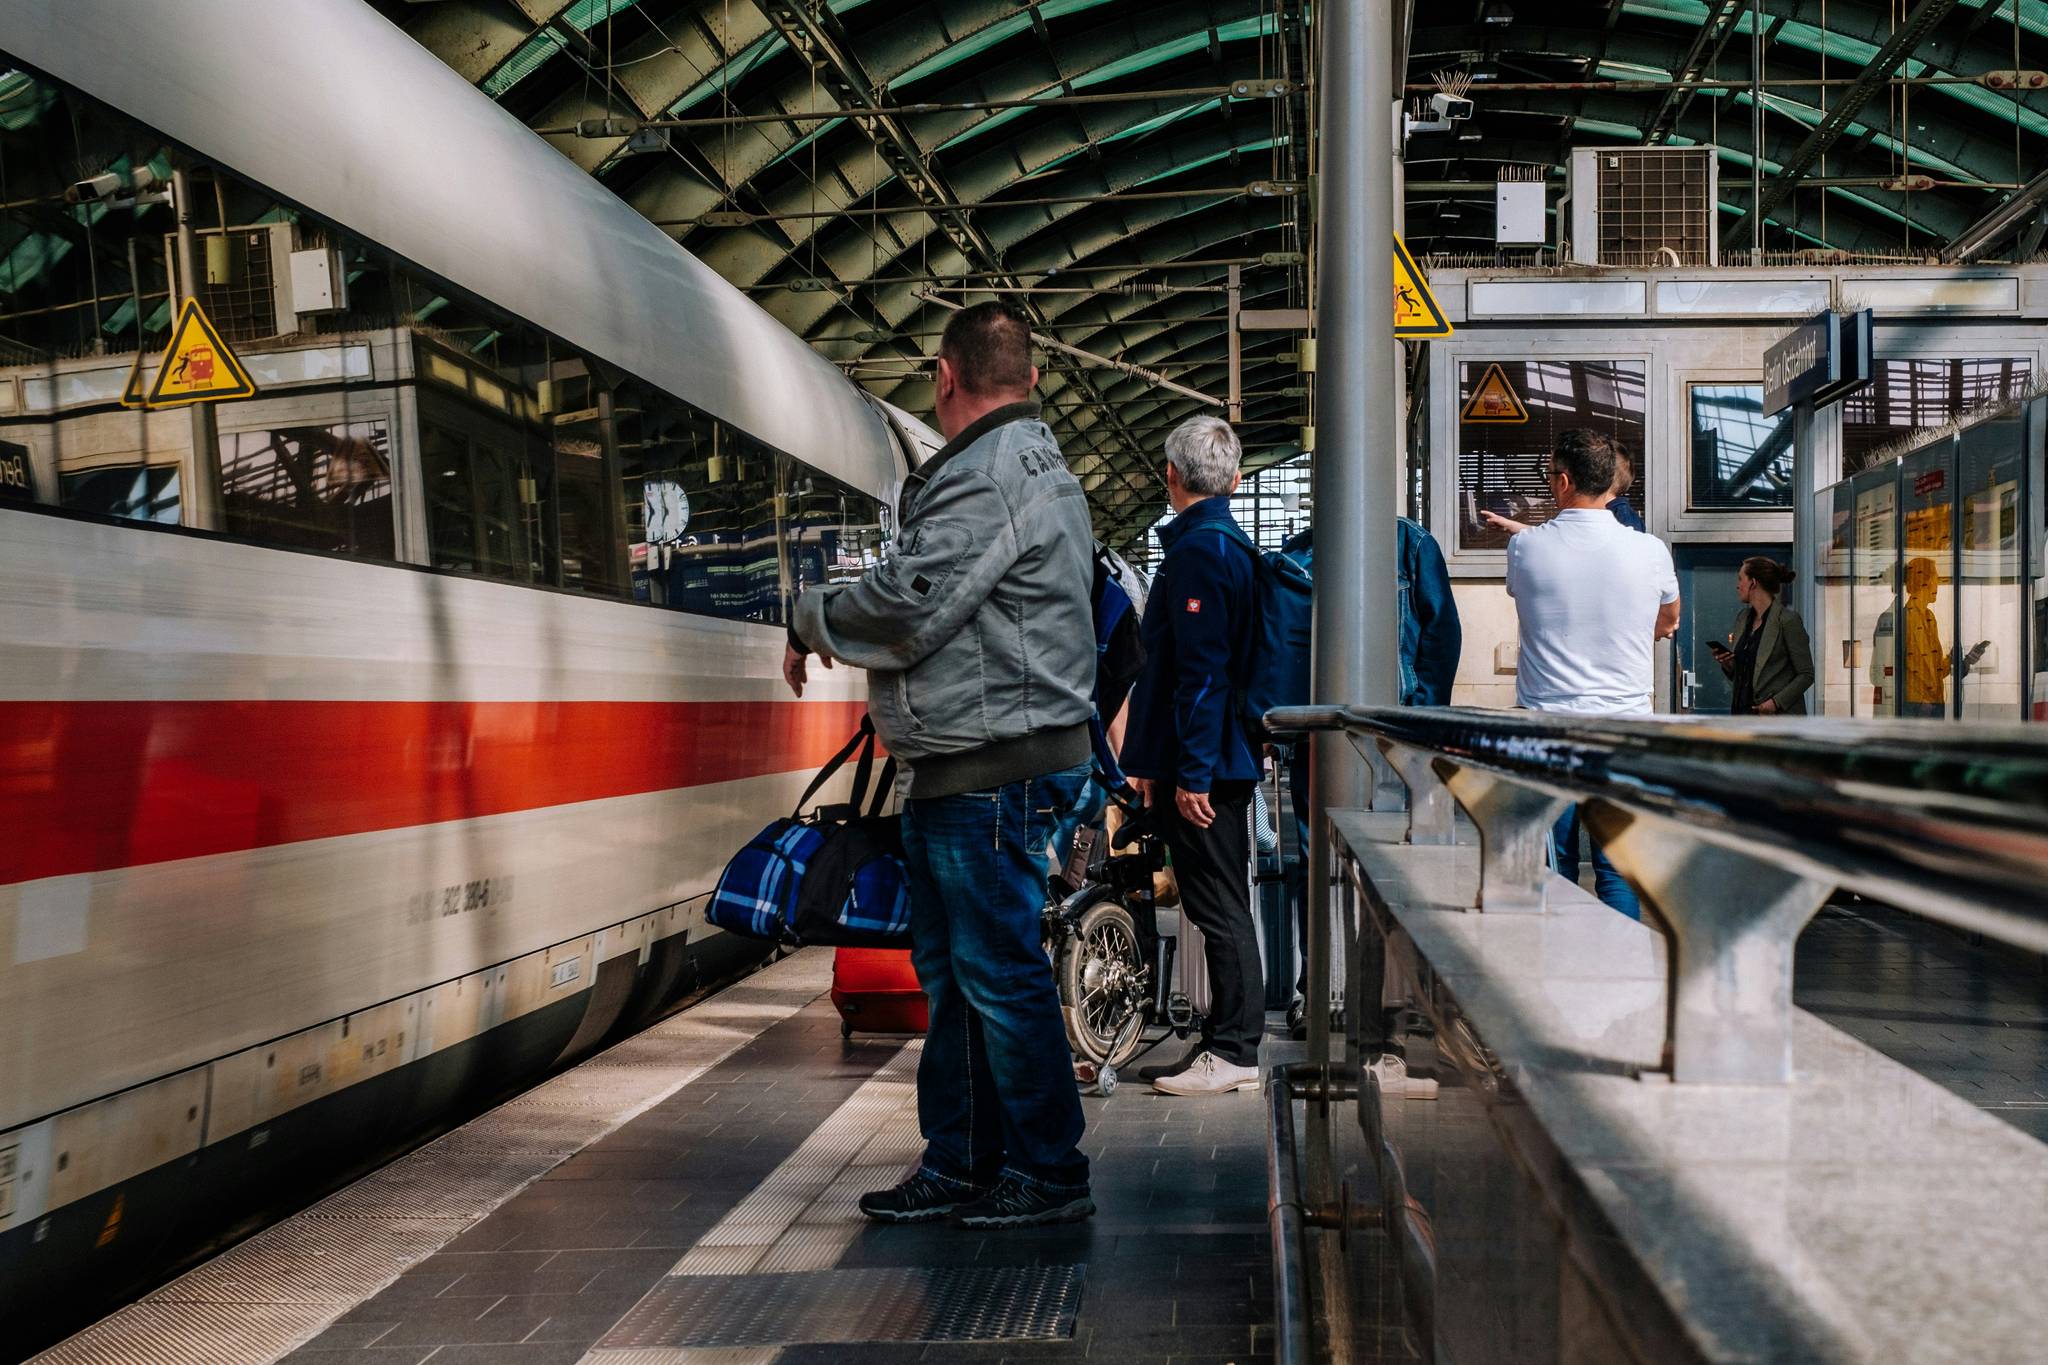 Germans are hesitant about mobile payments for trains